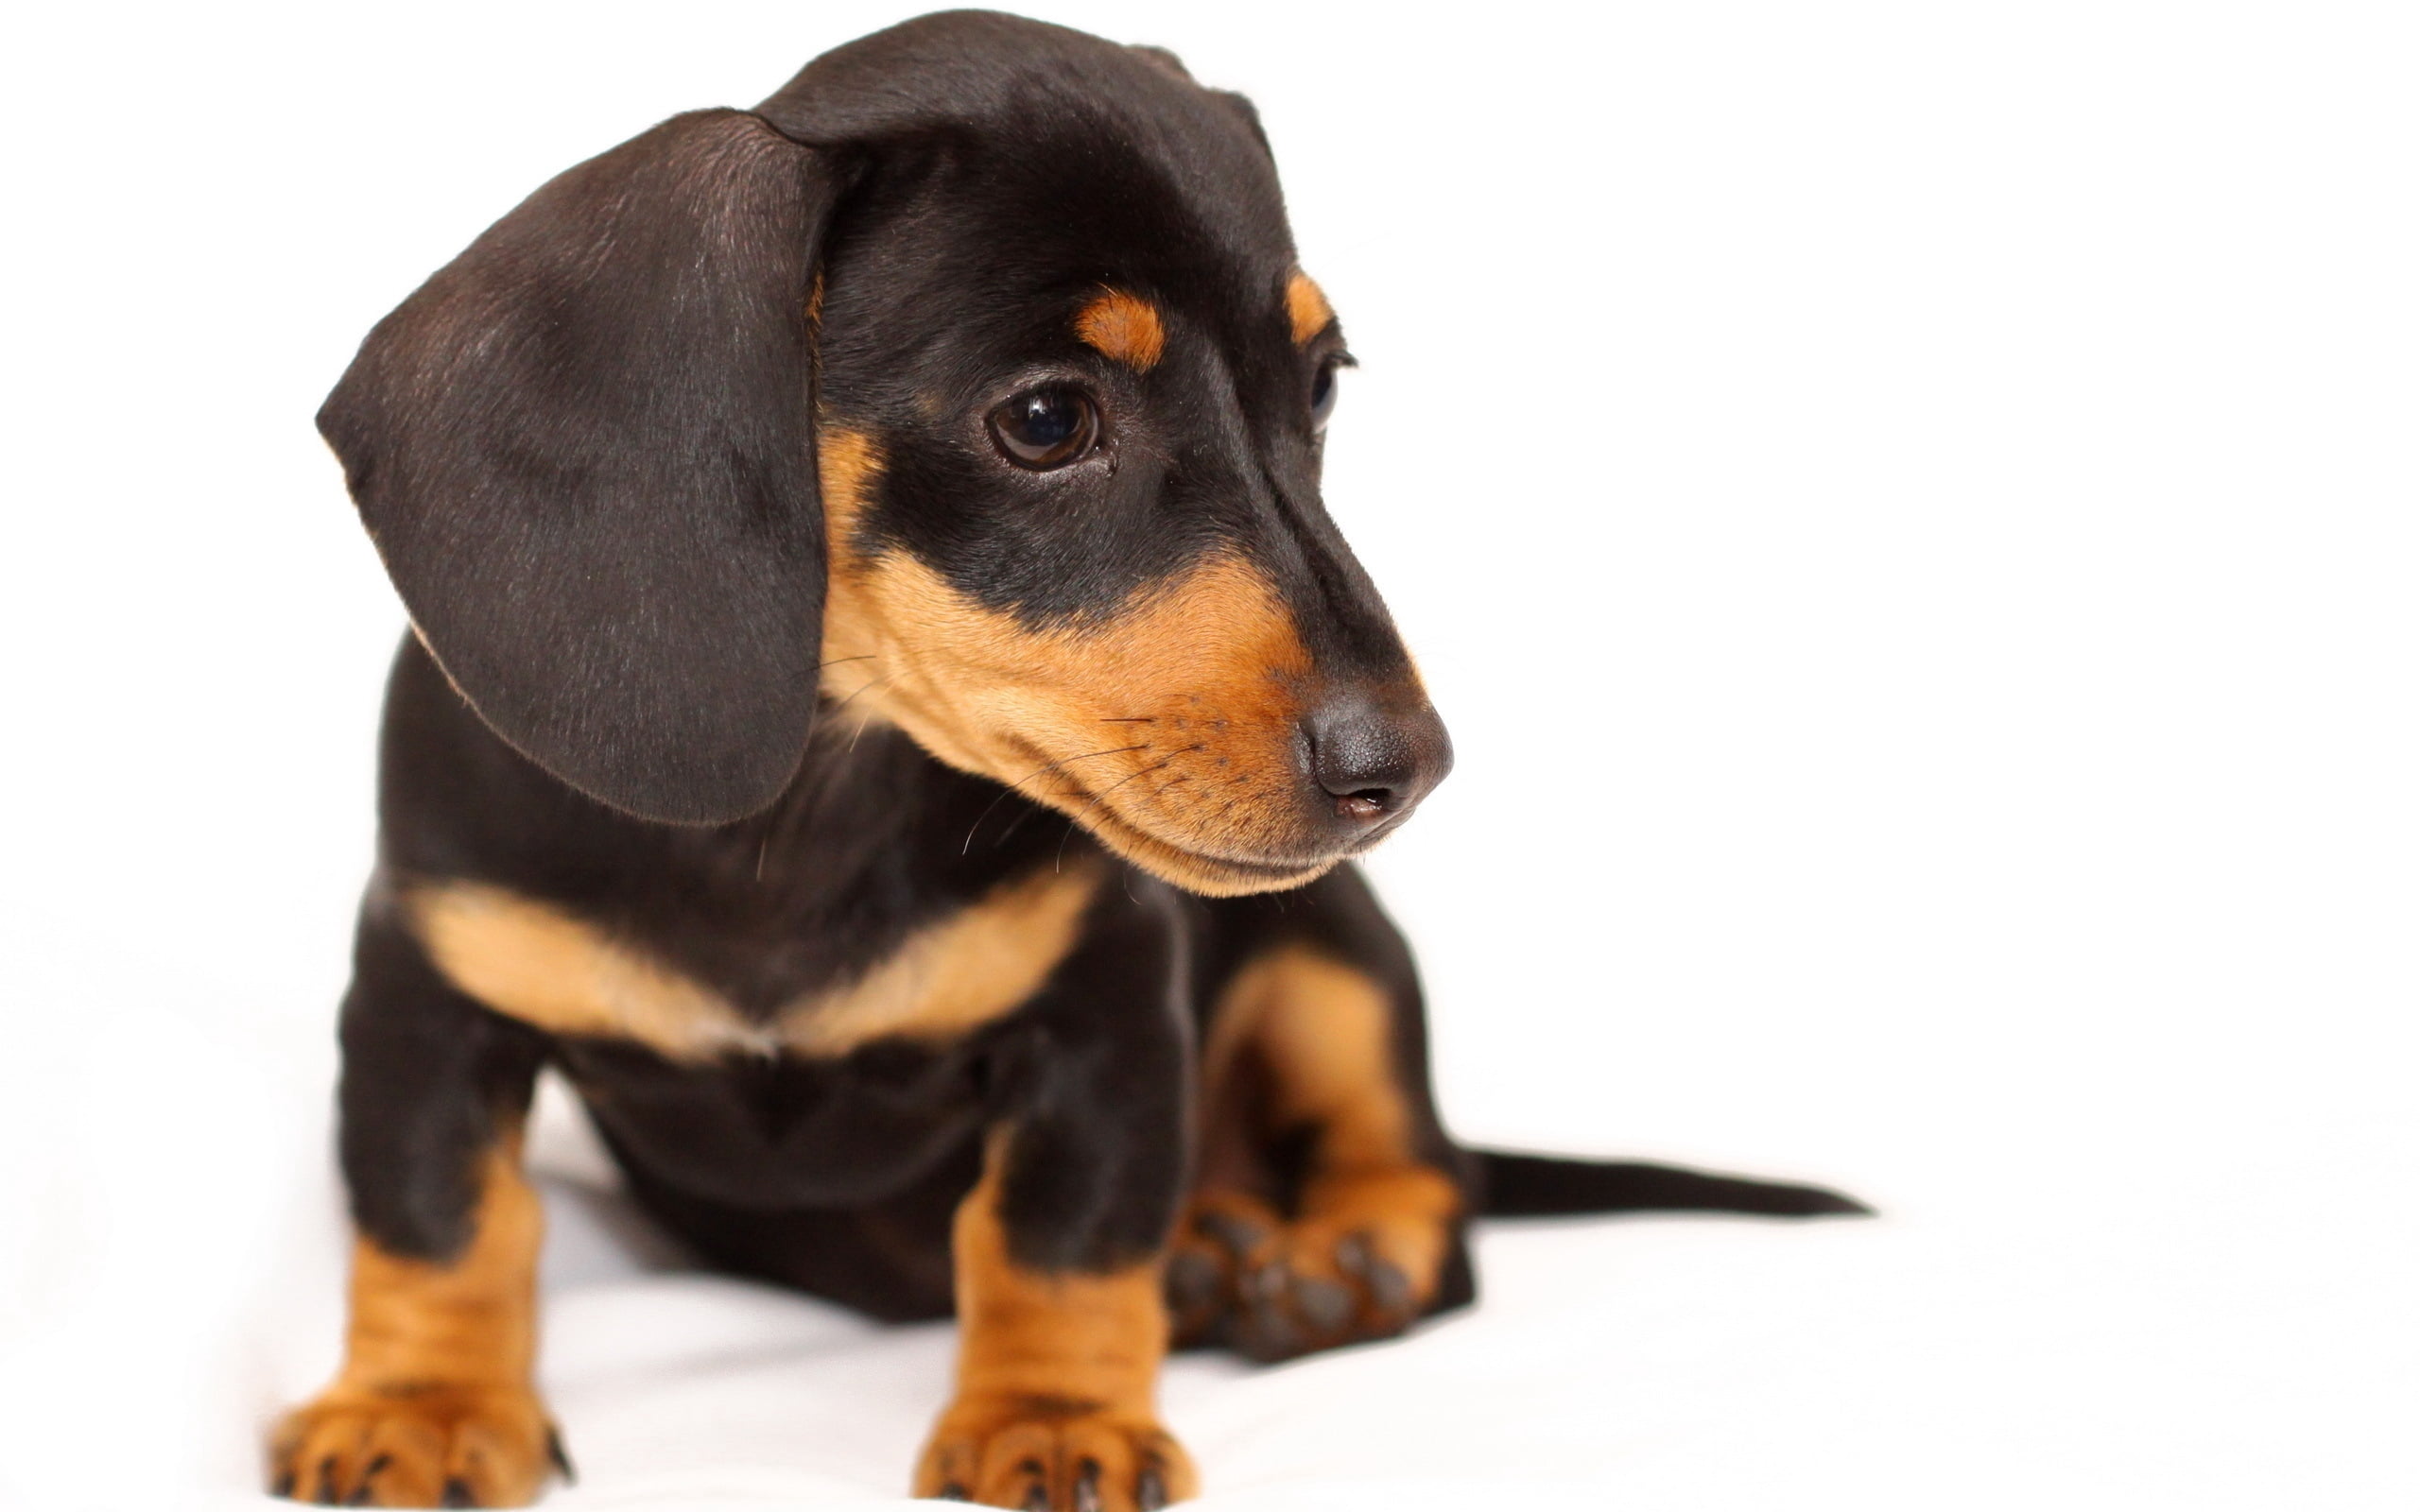 black and gold dachshund puppy, dog, snout, ears, sitting, small